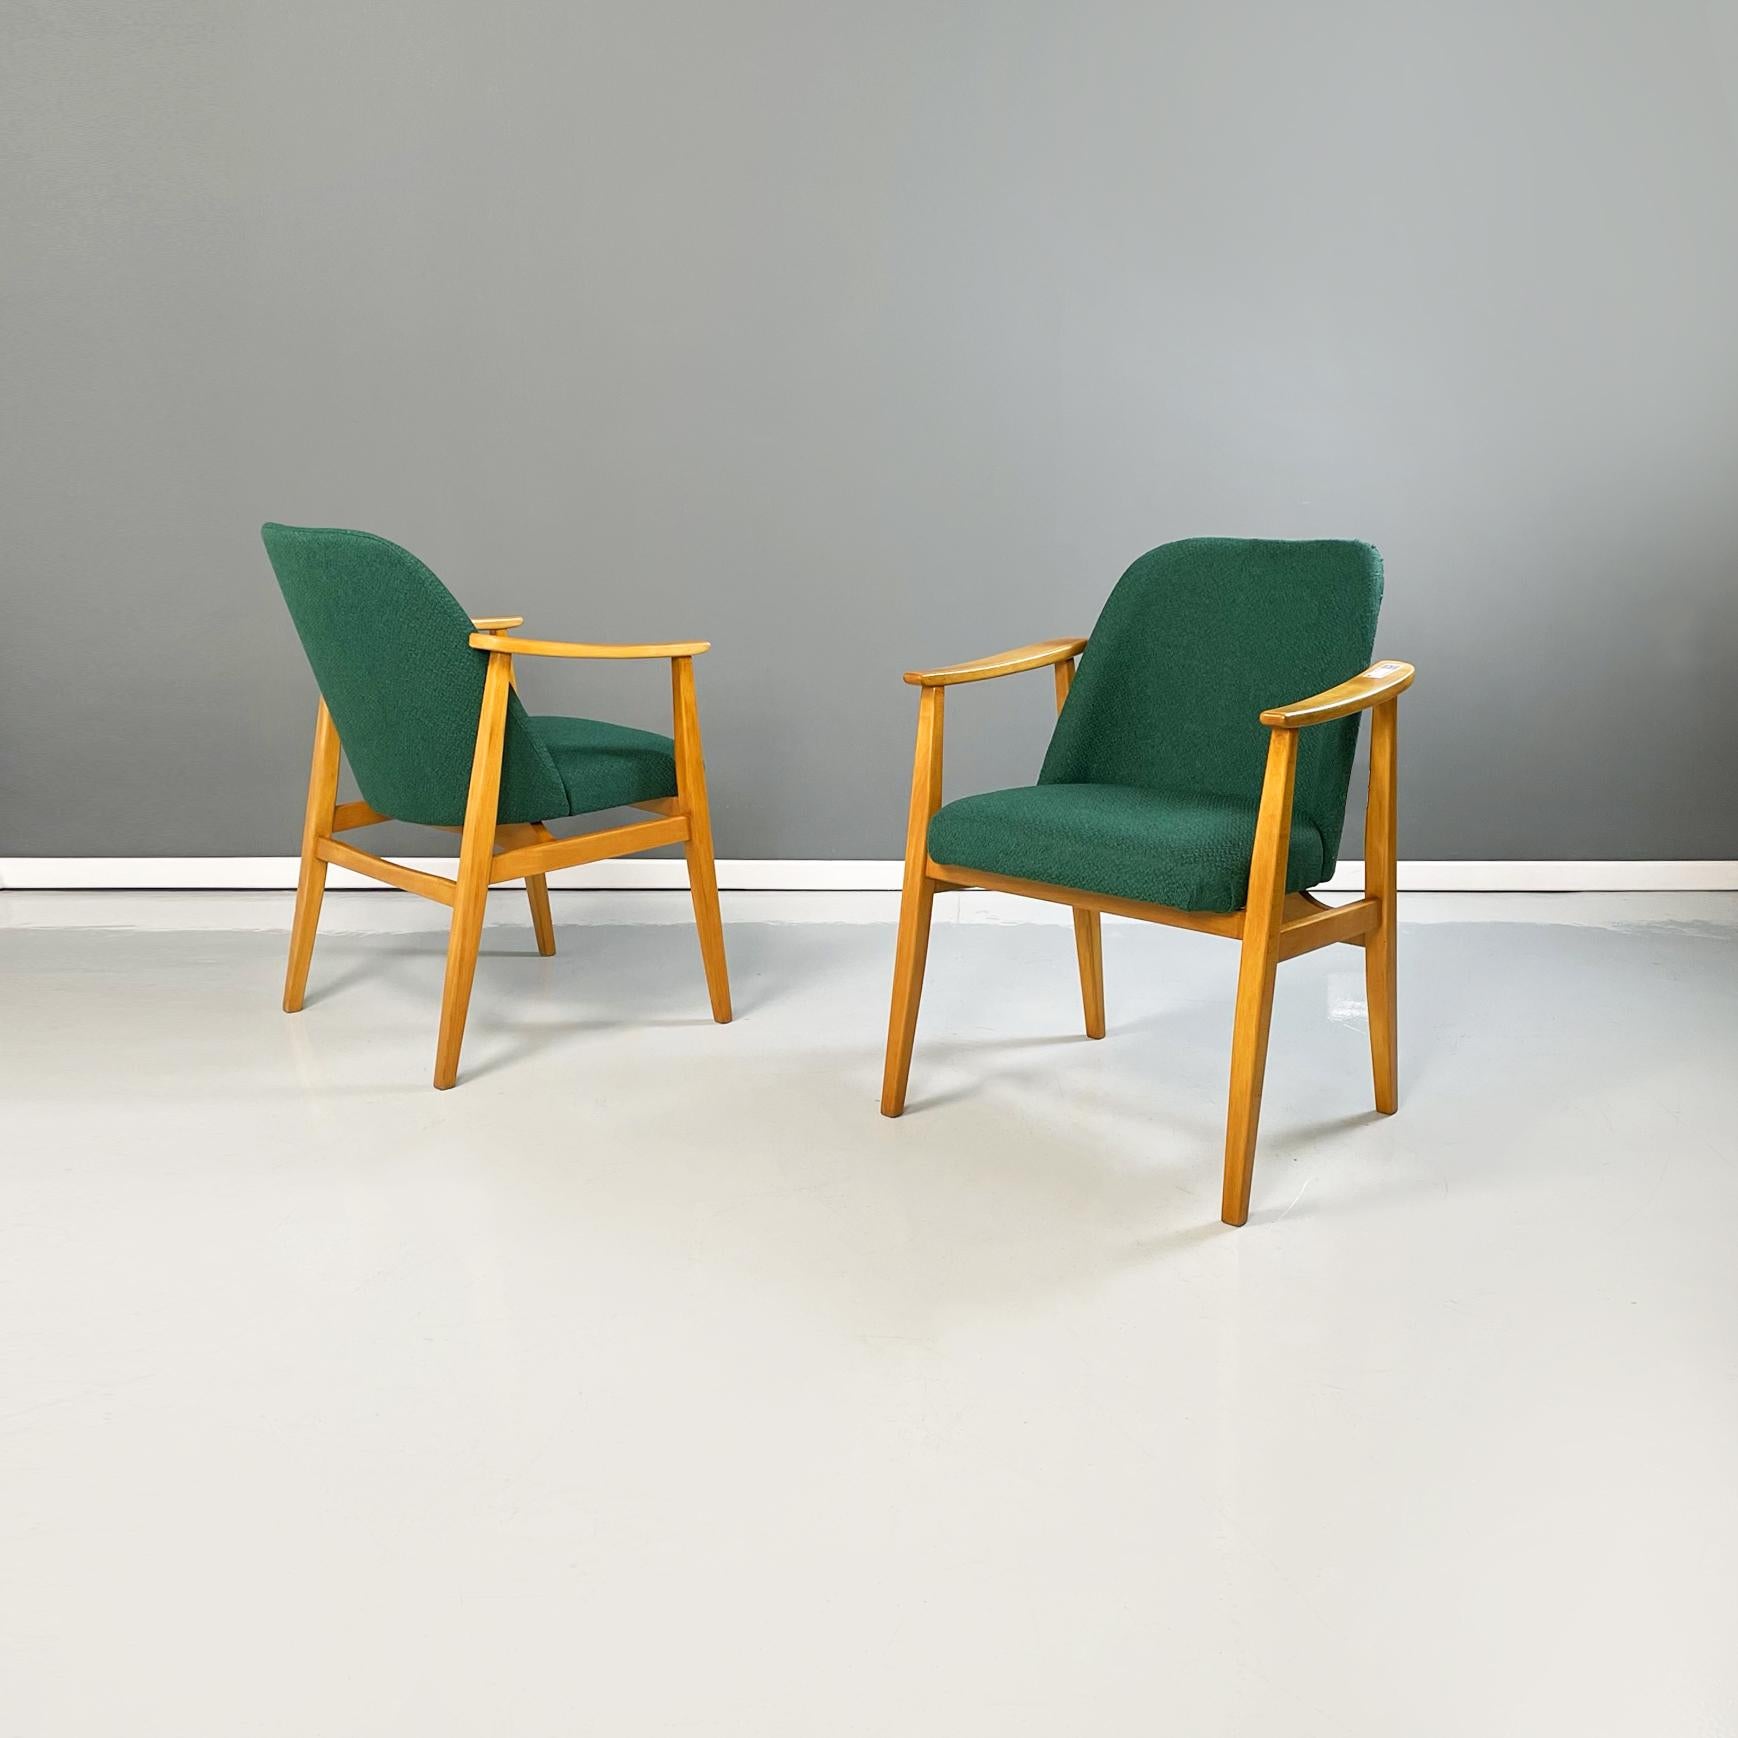 Danish Mid-Century Modern chairs in forest green fabric and wood, 1960s.
Pair of Classic and elegant armchairs with slightly curved seat and back upholstered in forest green fabric. Slightly curved wooden armrests. The structure with legs with